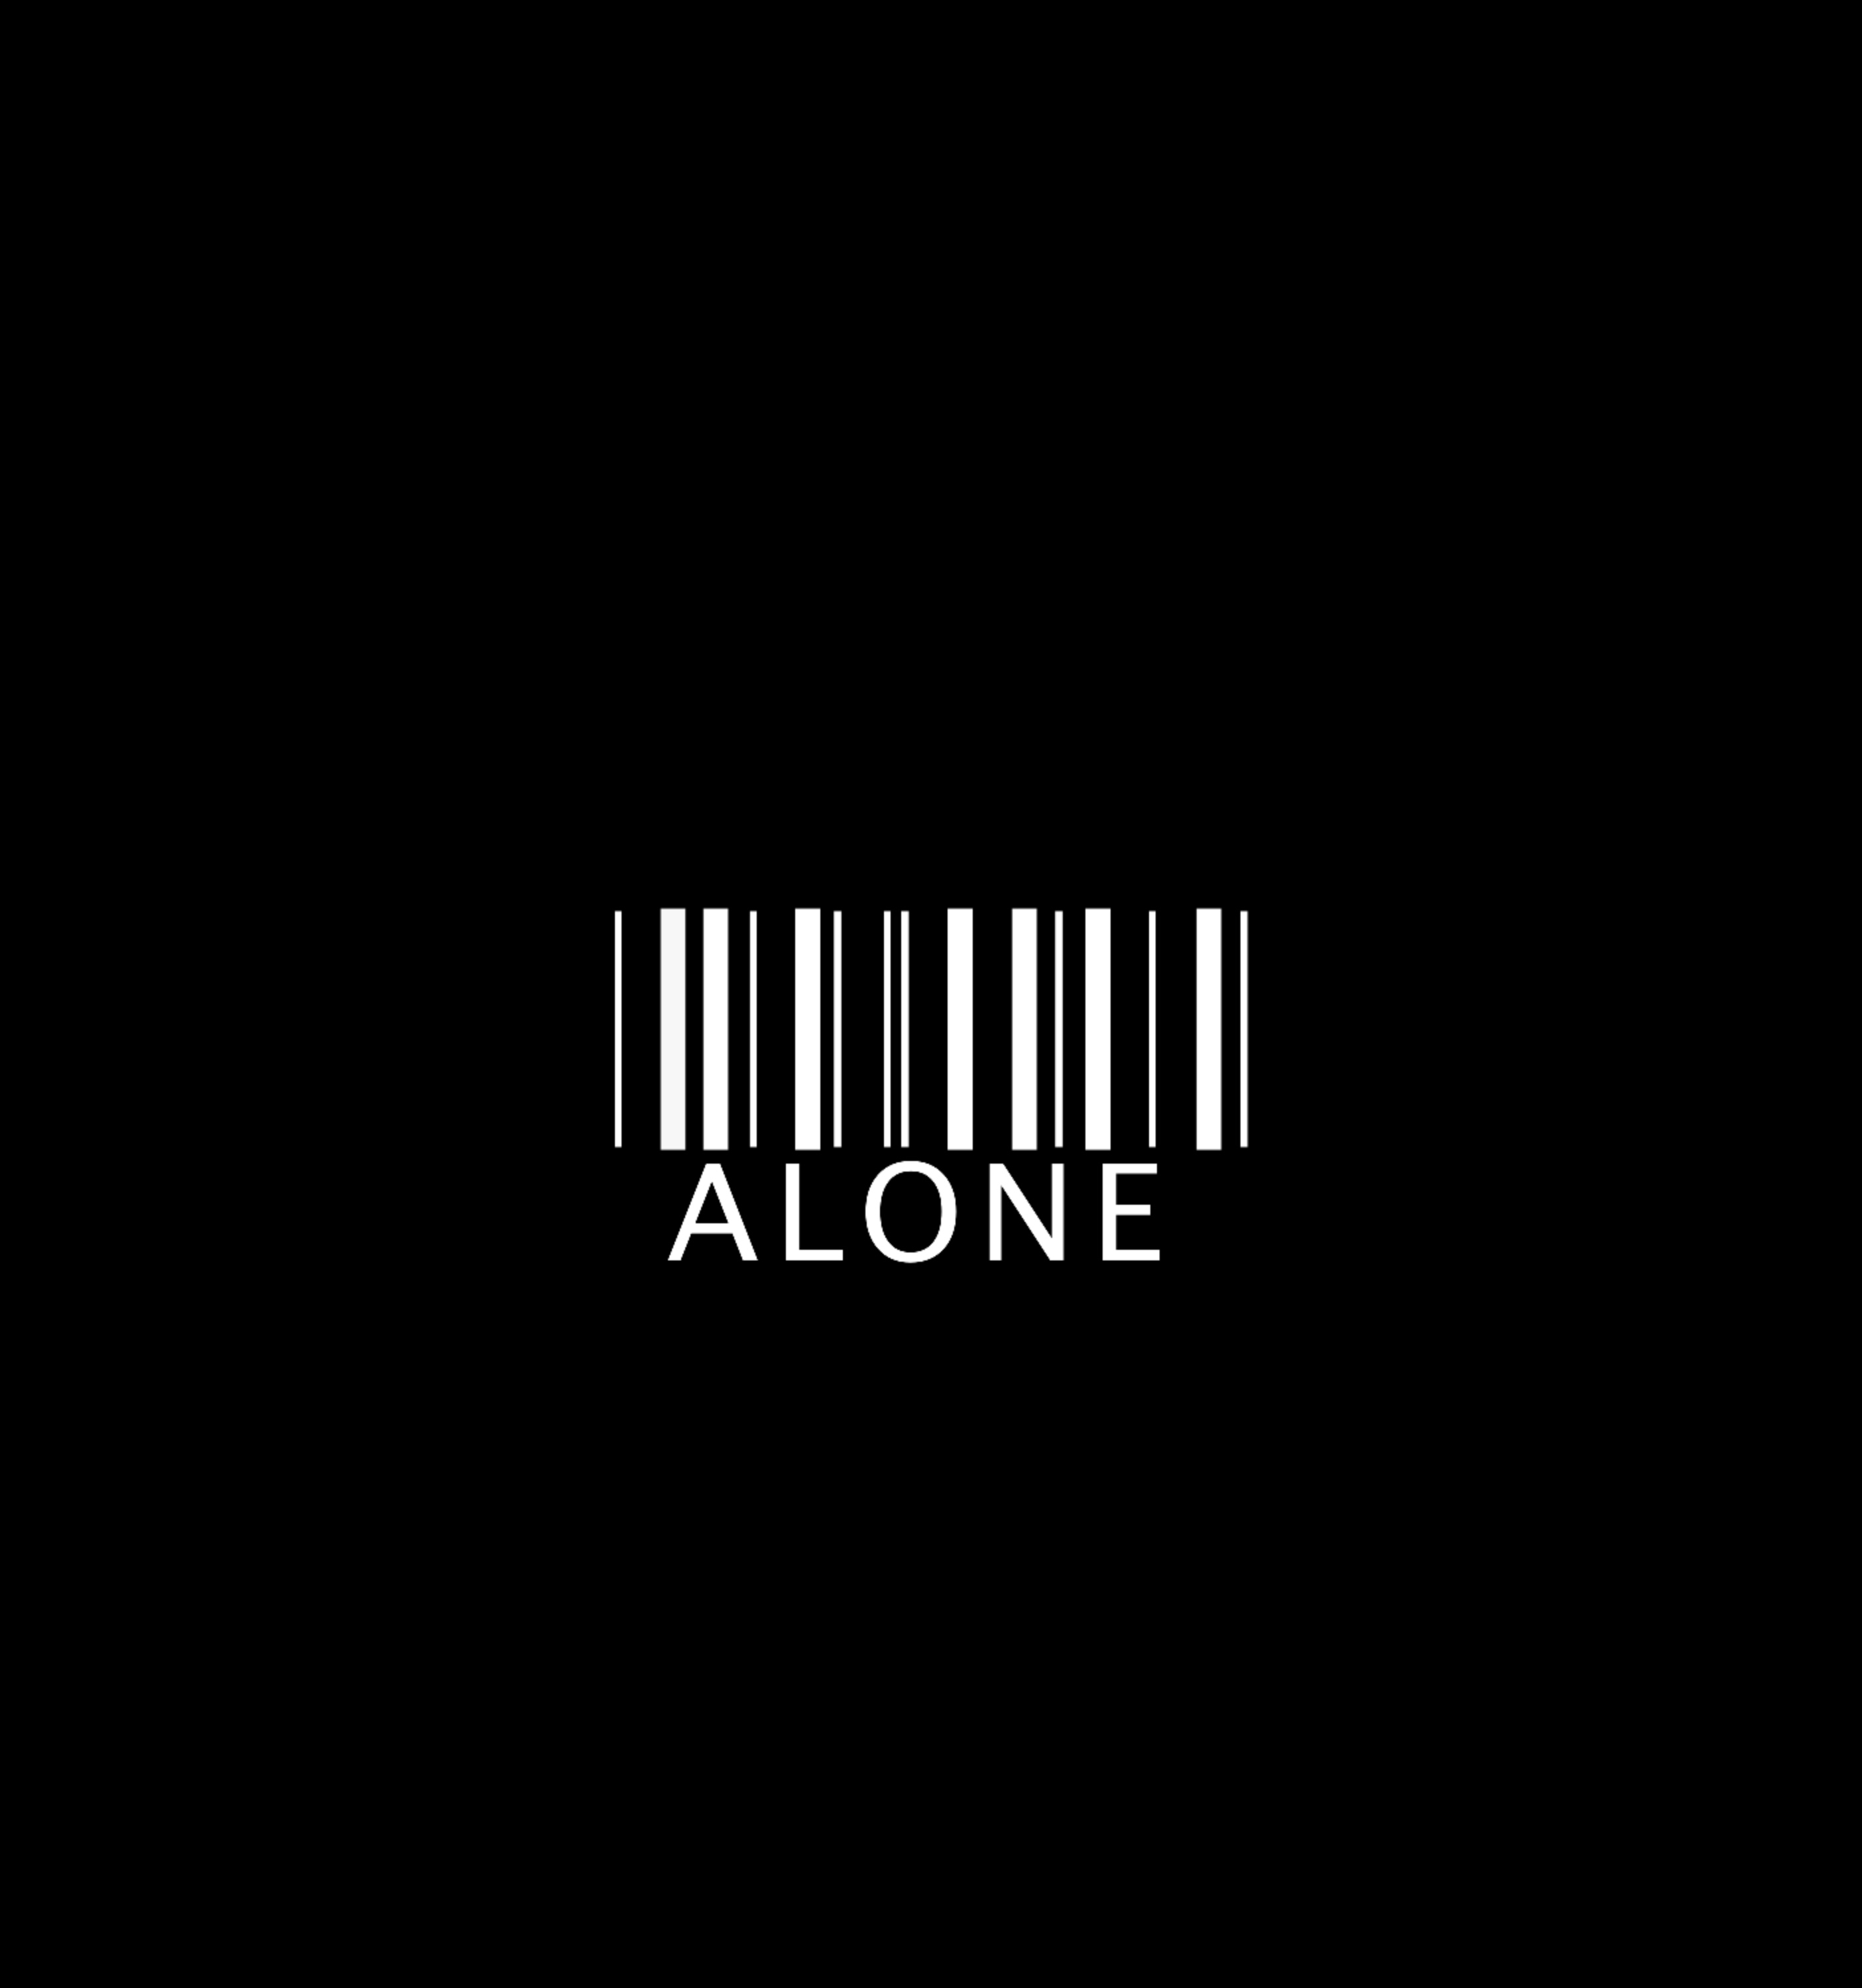 loneliness, words, life, inscription, barcode